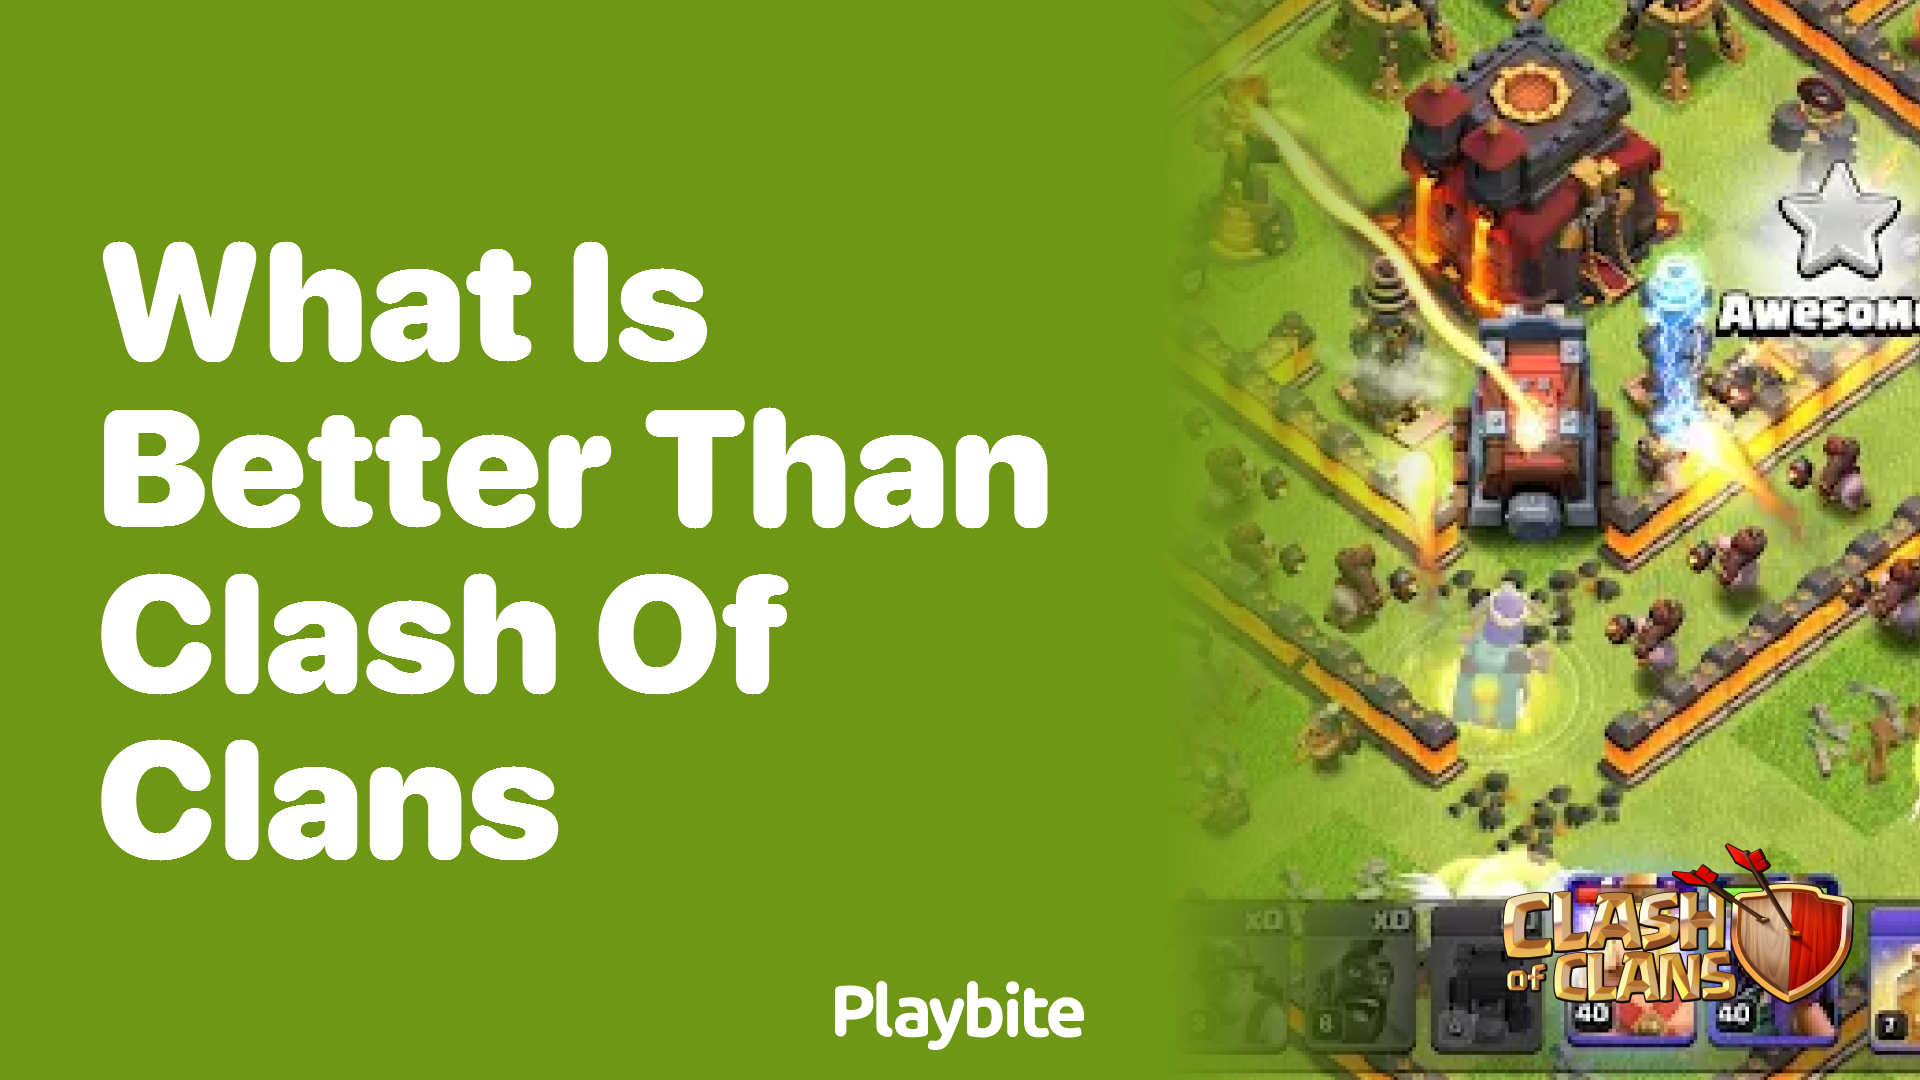 What is Better Than Clash of Clans?